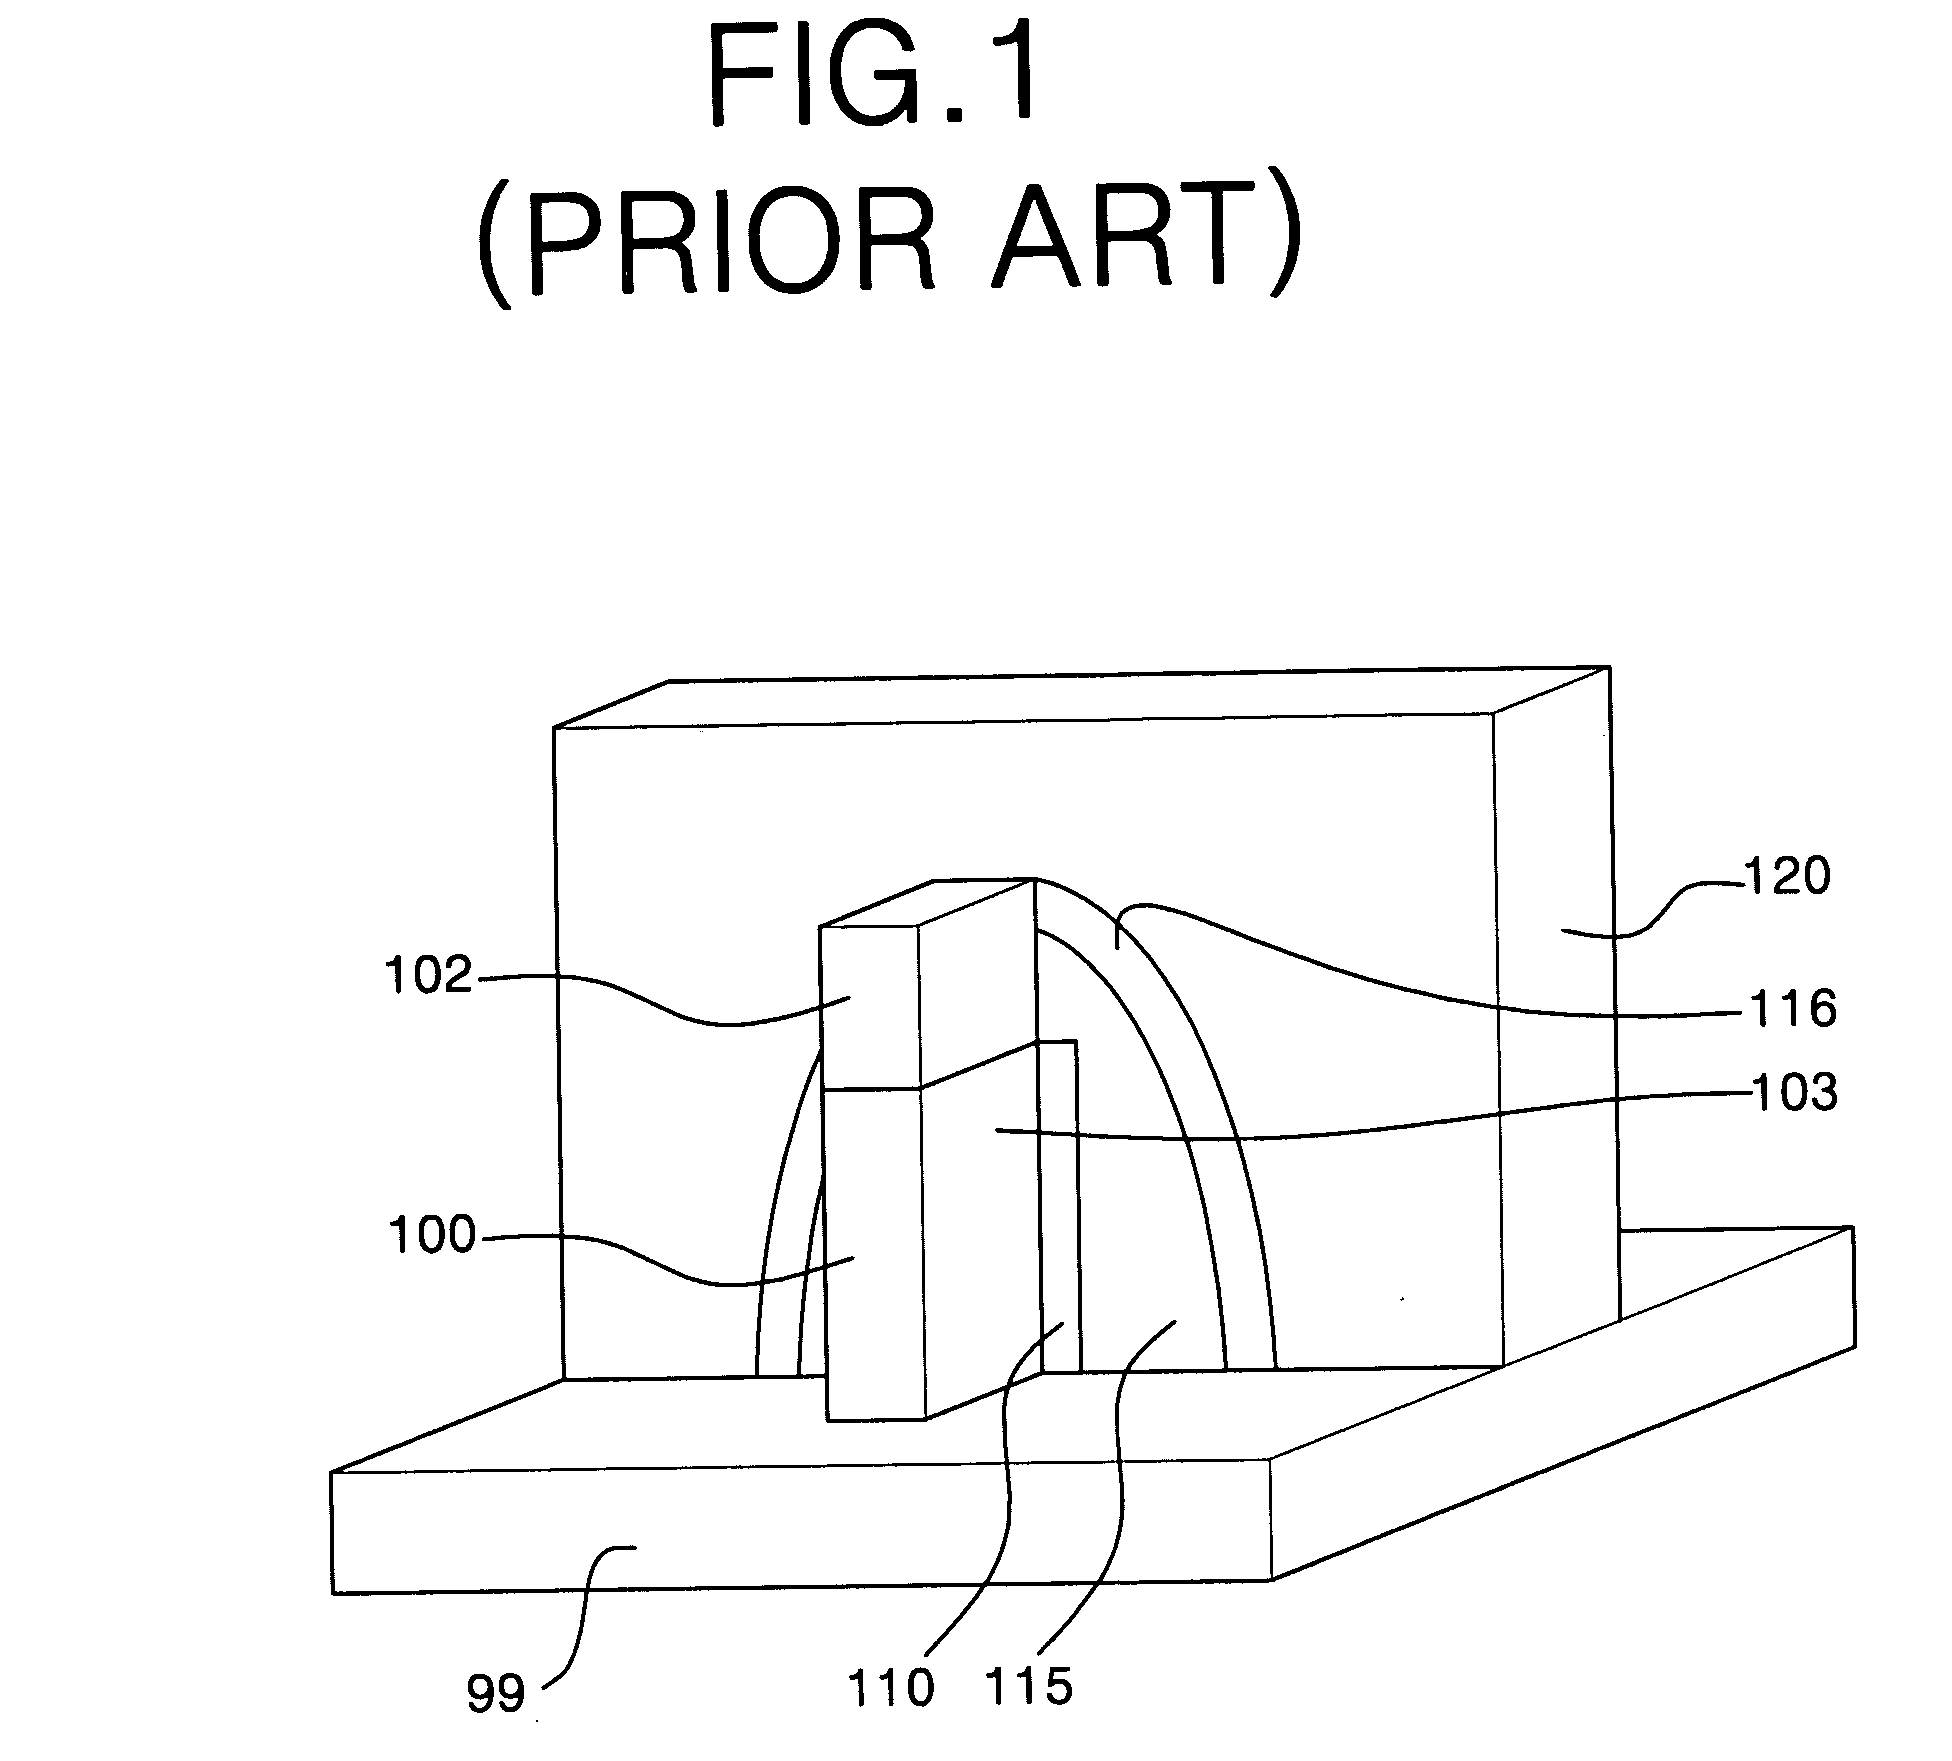 Nonvolatile memory cells having high control gate coupling ratios using grooved floating gates and methods of forming same